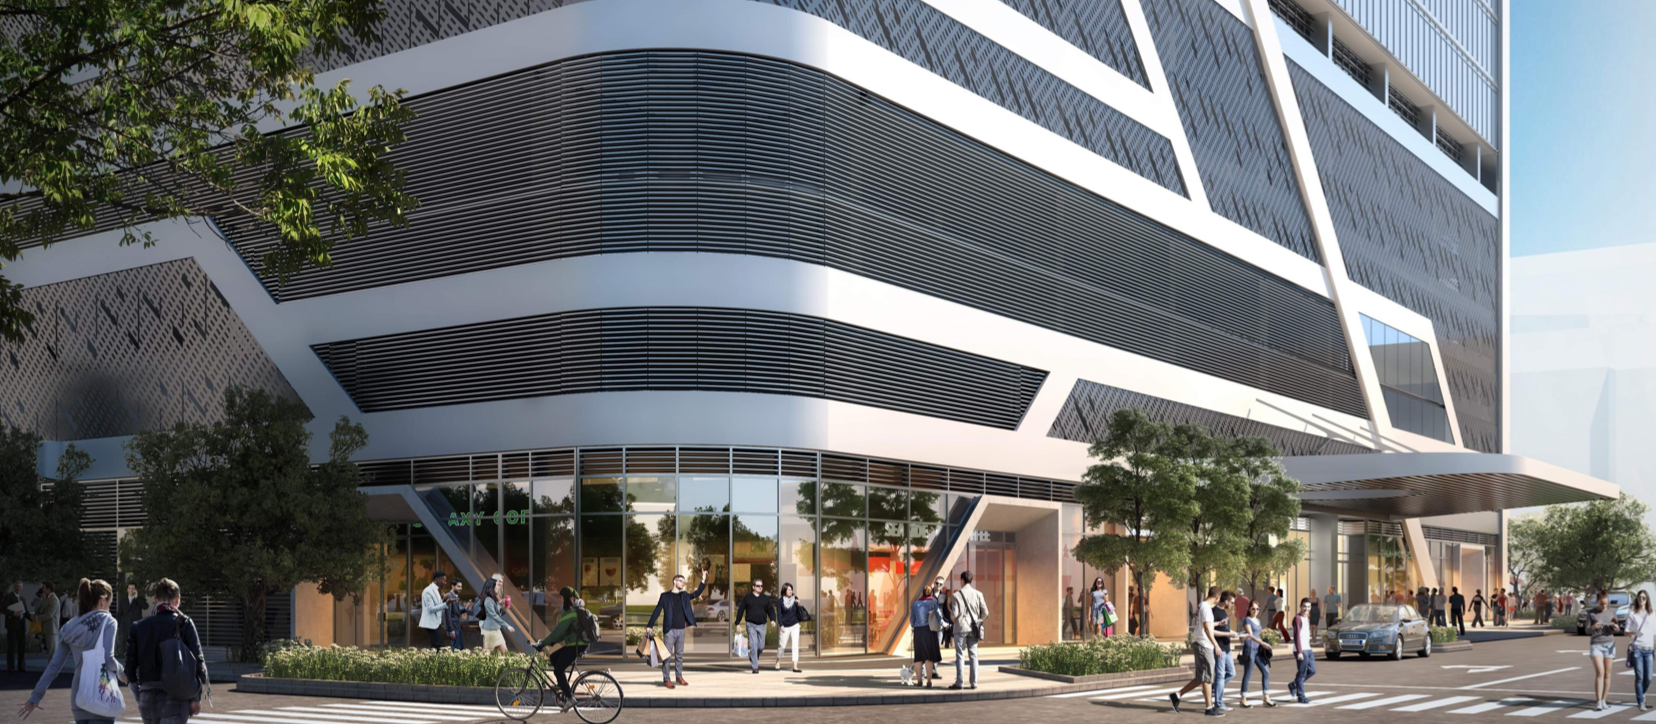 Older Rendering of Miami Station. Designed by ODP Architecture & Design.